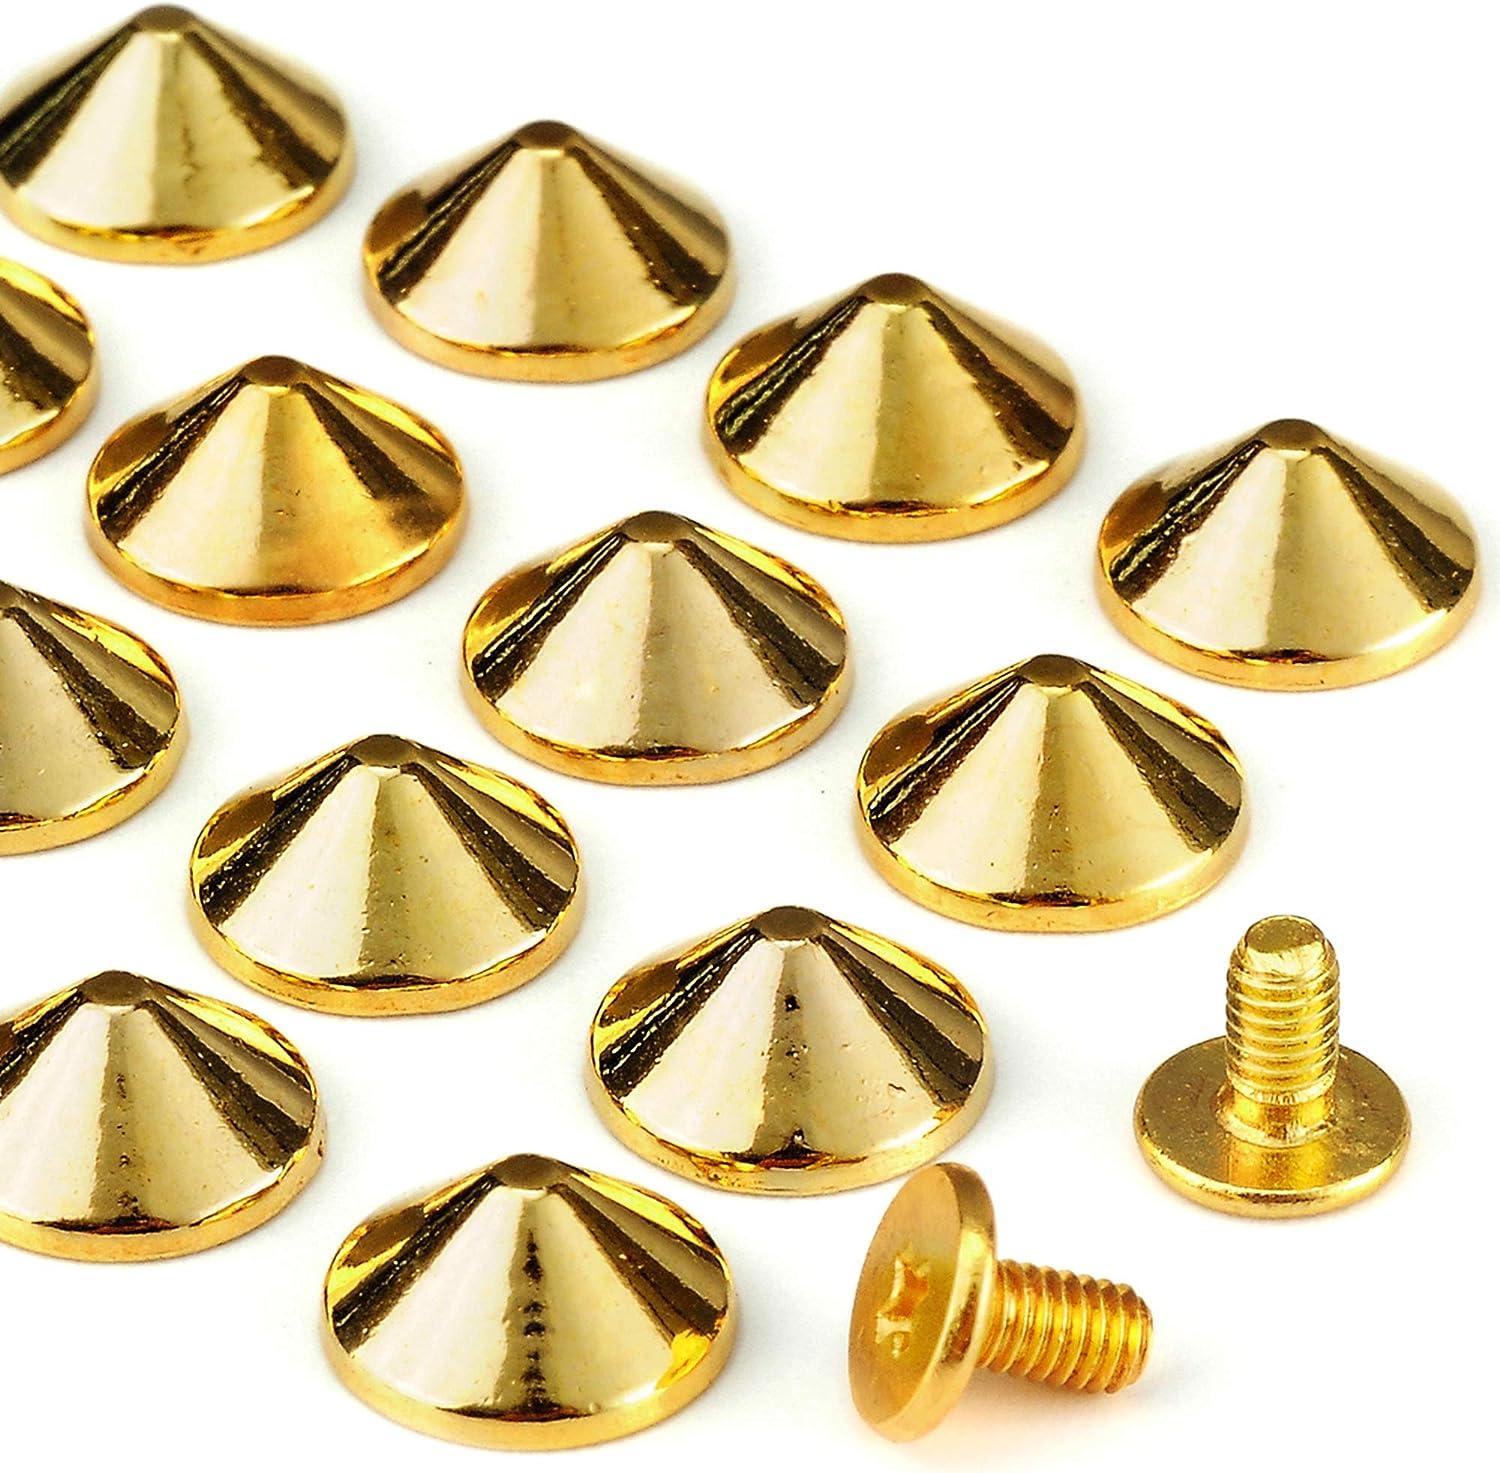 Bullet Cone Colored Studs And Spikes For Clothes Diy Handcraft